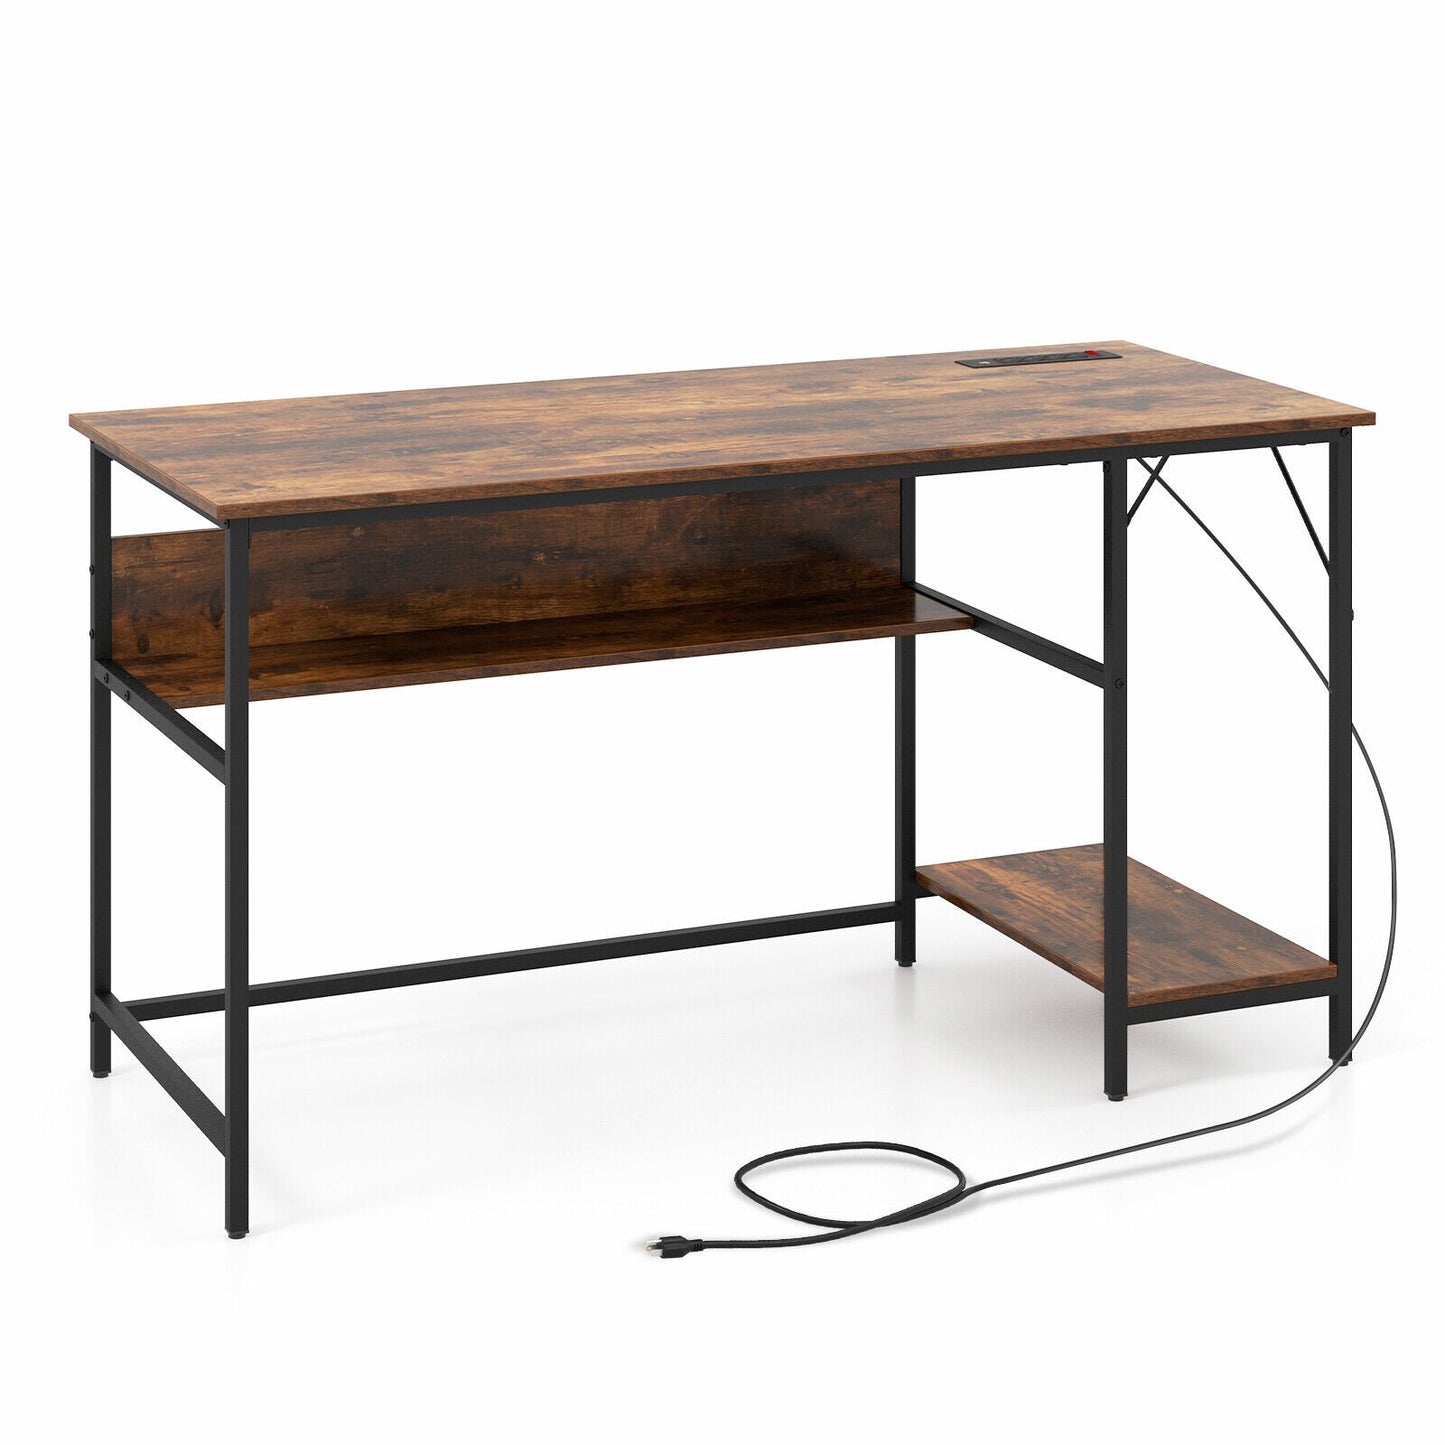 55 Inches Computer Desk with Charging Station, Brown